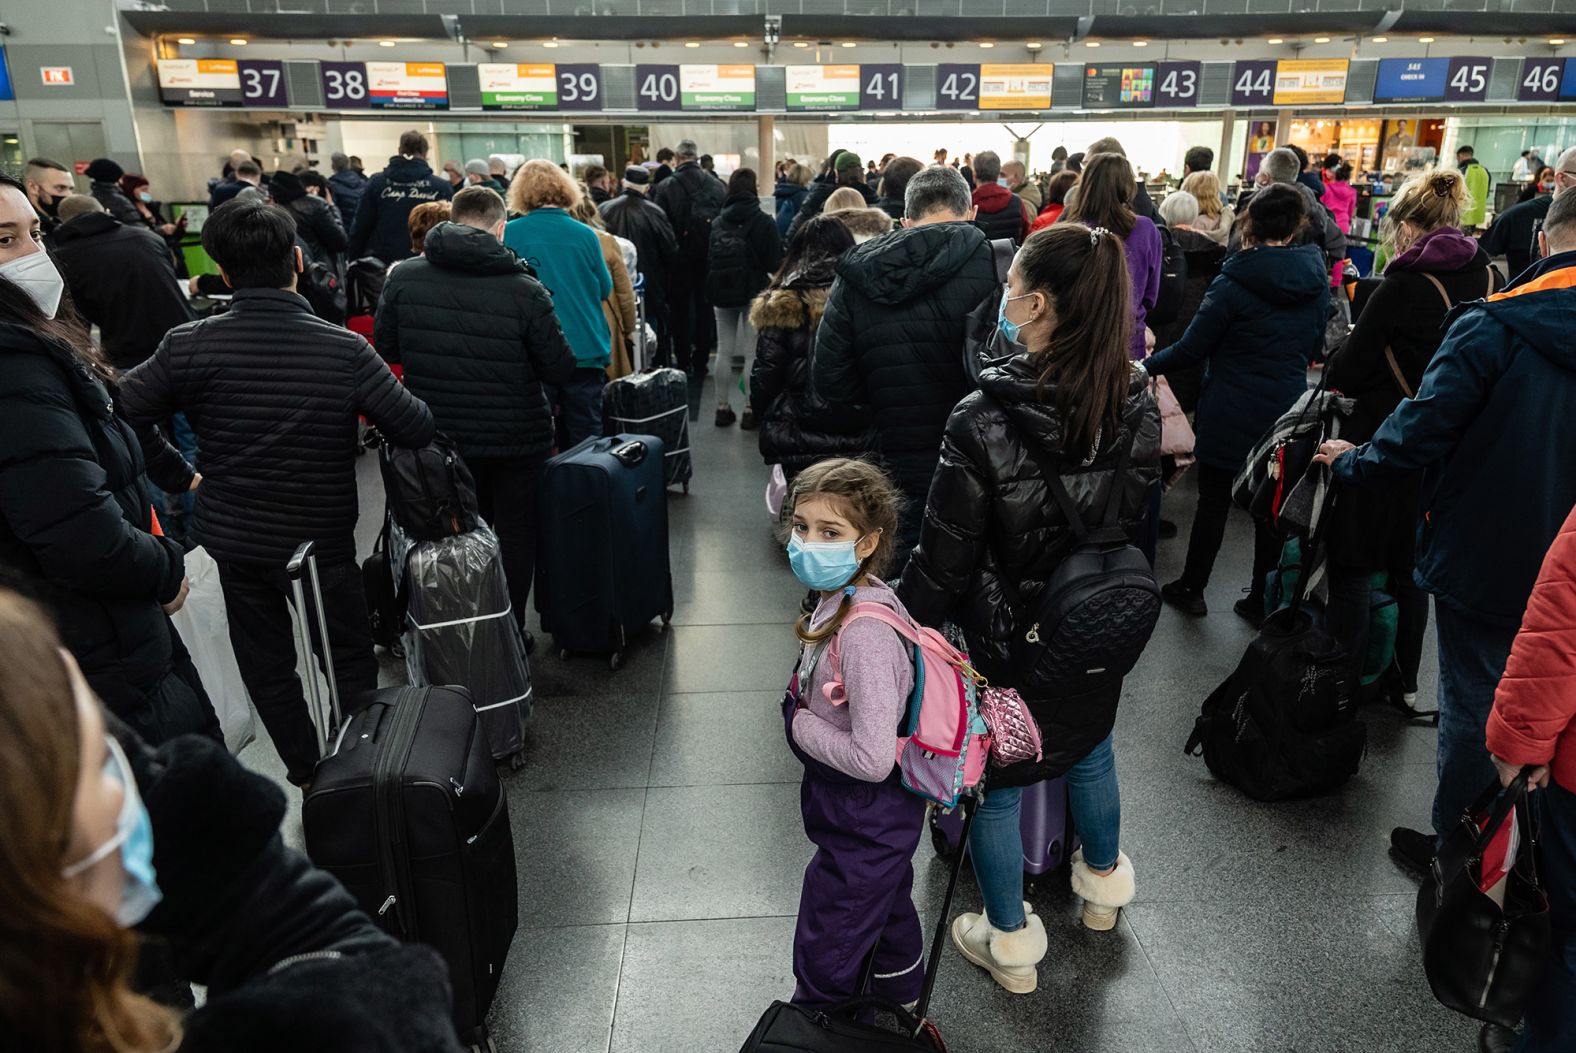 Travelers wait in line to check in to their departing flights February 15 at the Boryspil International Airport outside Kyiv. US President Joe Biden<a href="https://www.cnn.com/2022/02/10/politics/biden-ukraine-things-could-go-crazy/index.html" target="_blank"> urged Americans in Ukraine to leave the country,</a> warning that "things could go crazy quickly" in the region.